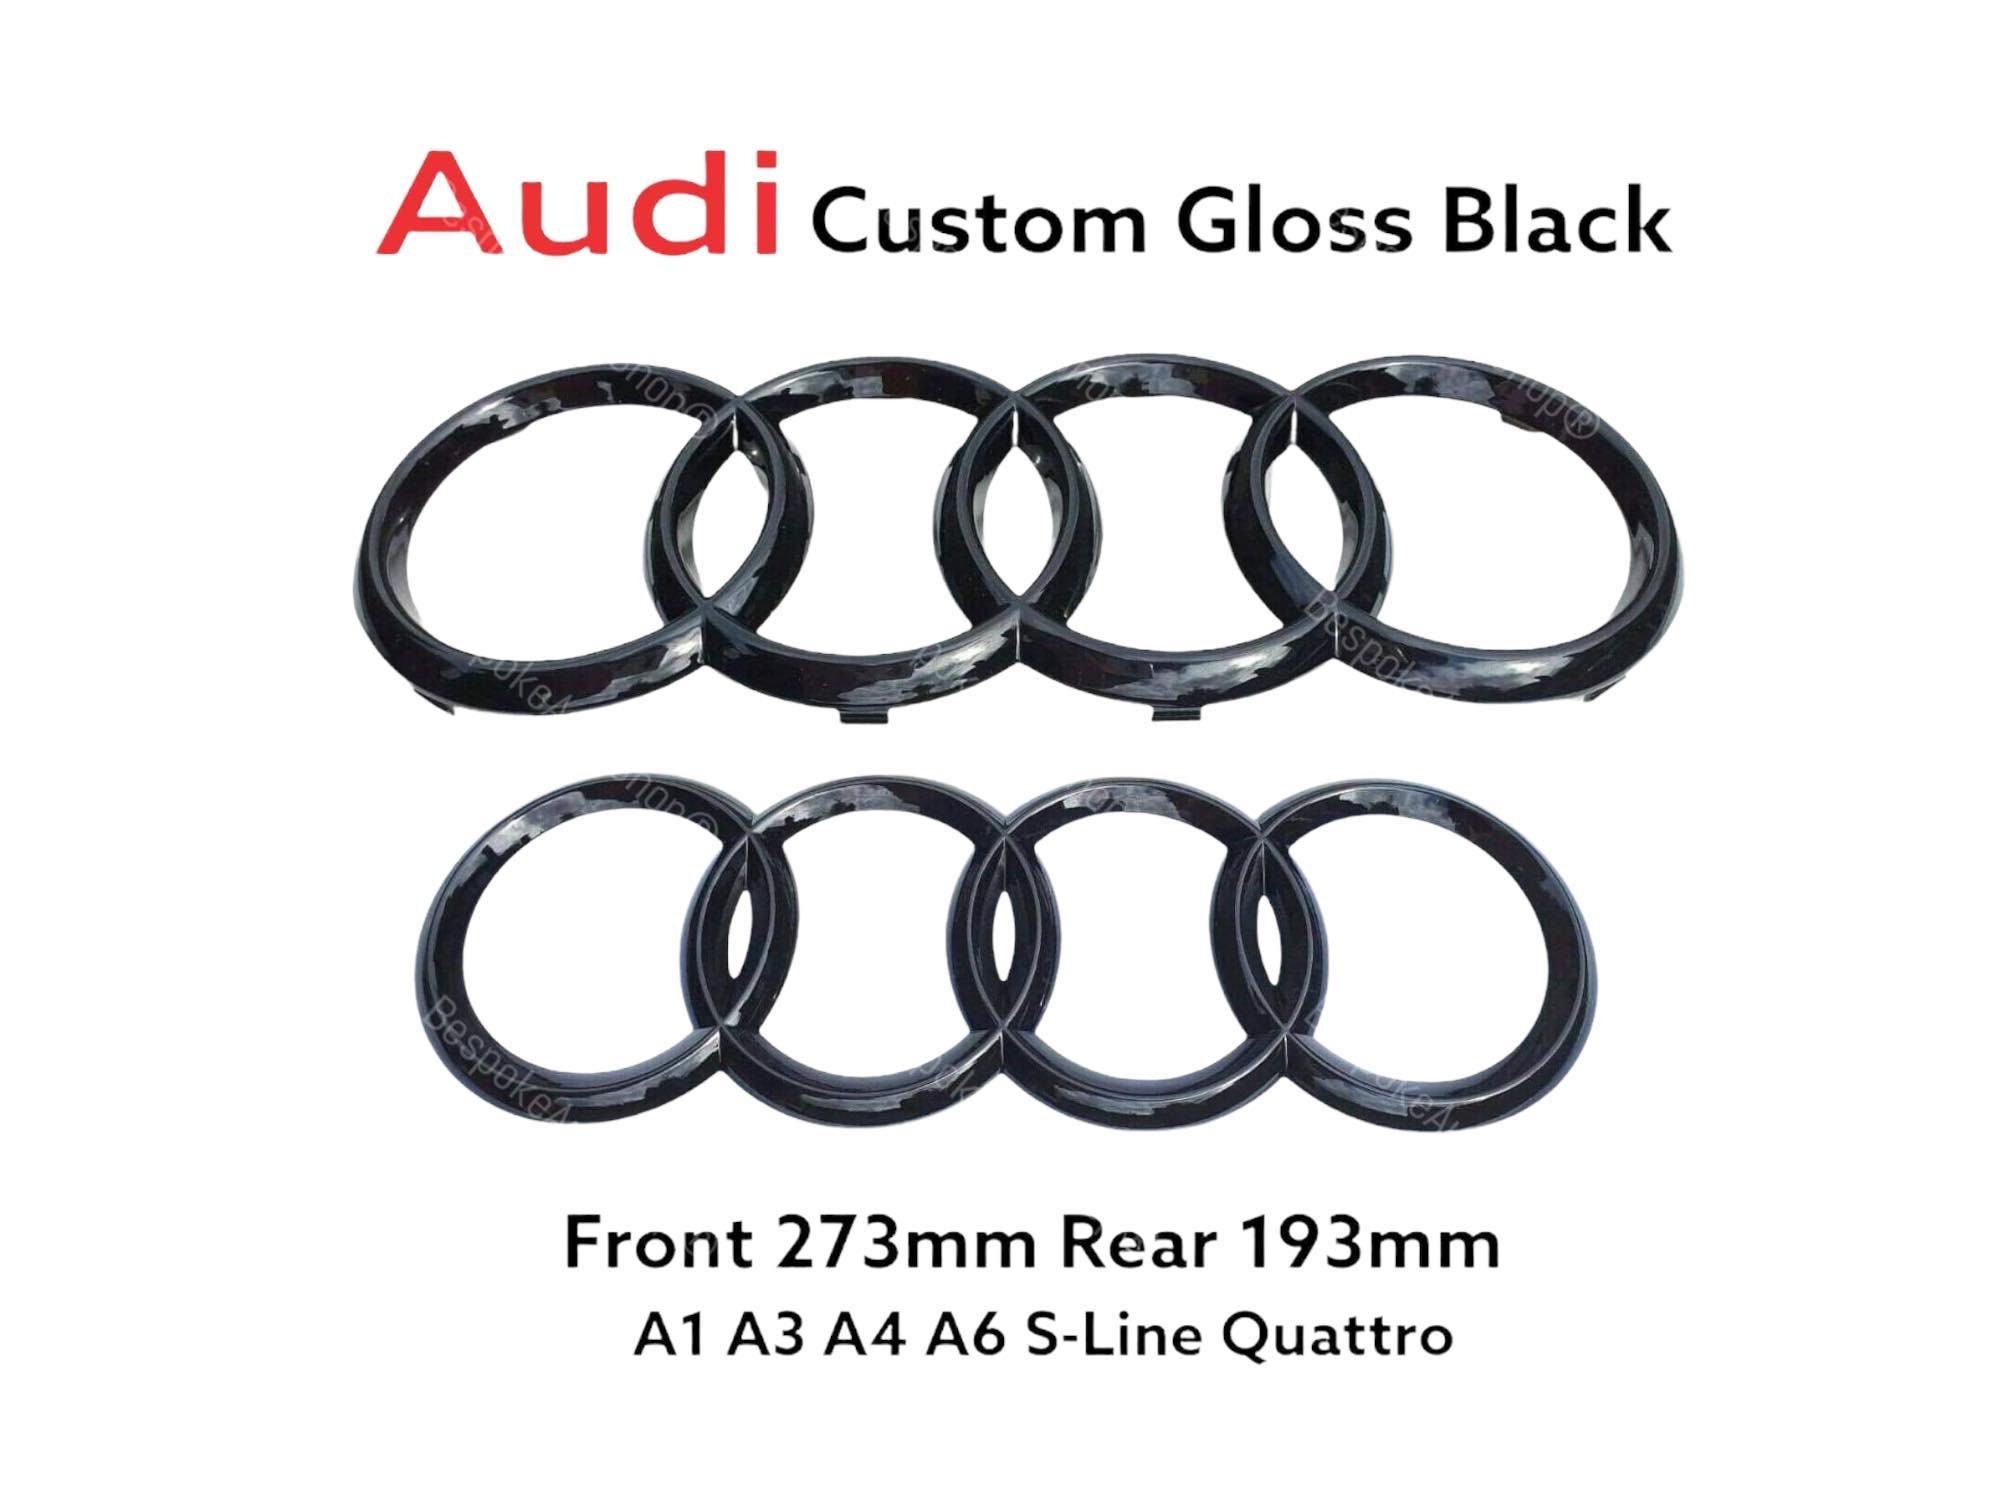 Audi A4 Accessories - Etsy